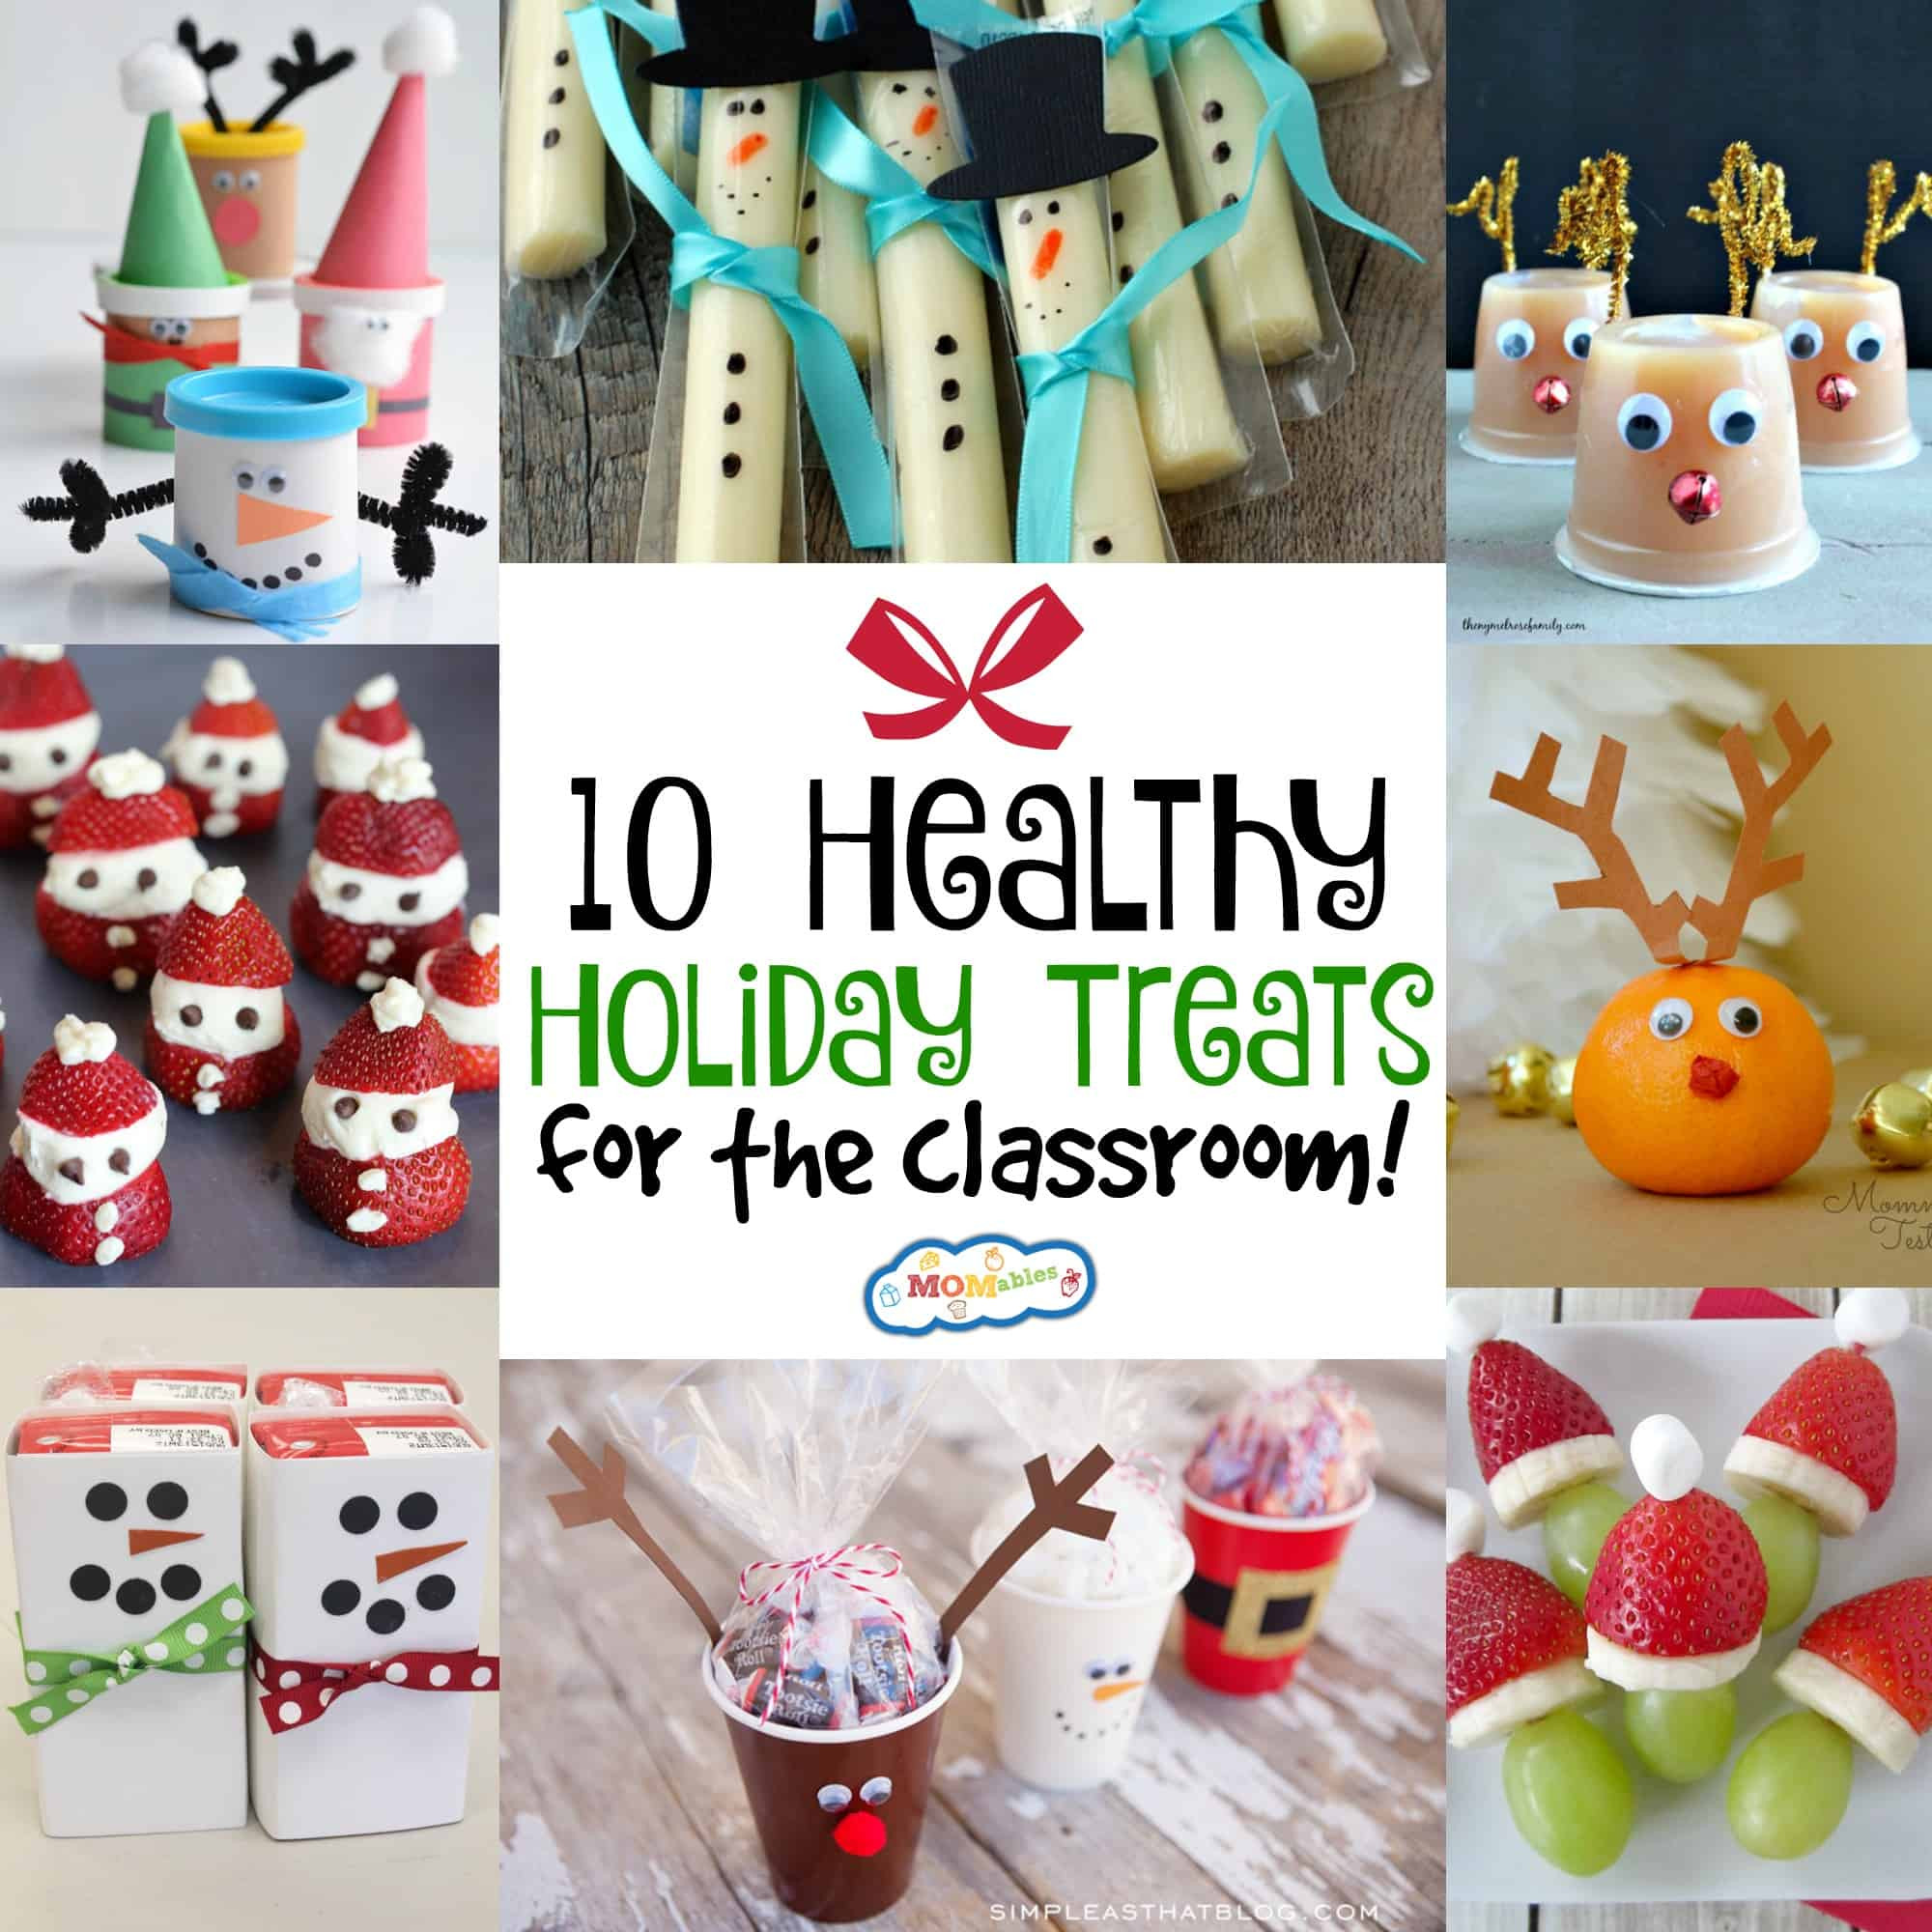 Holiday Party Food Ideas Kids
 10 Healthy Holiday Treats for the Classroom MOMables